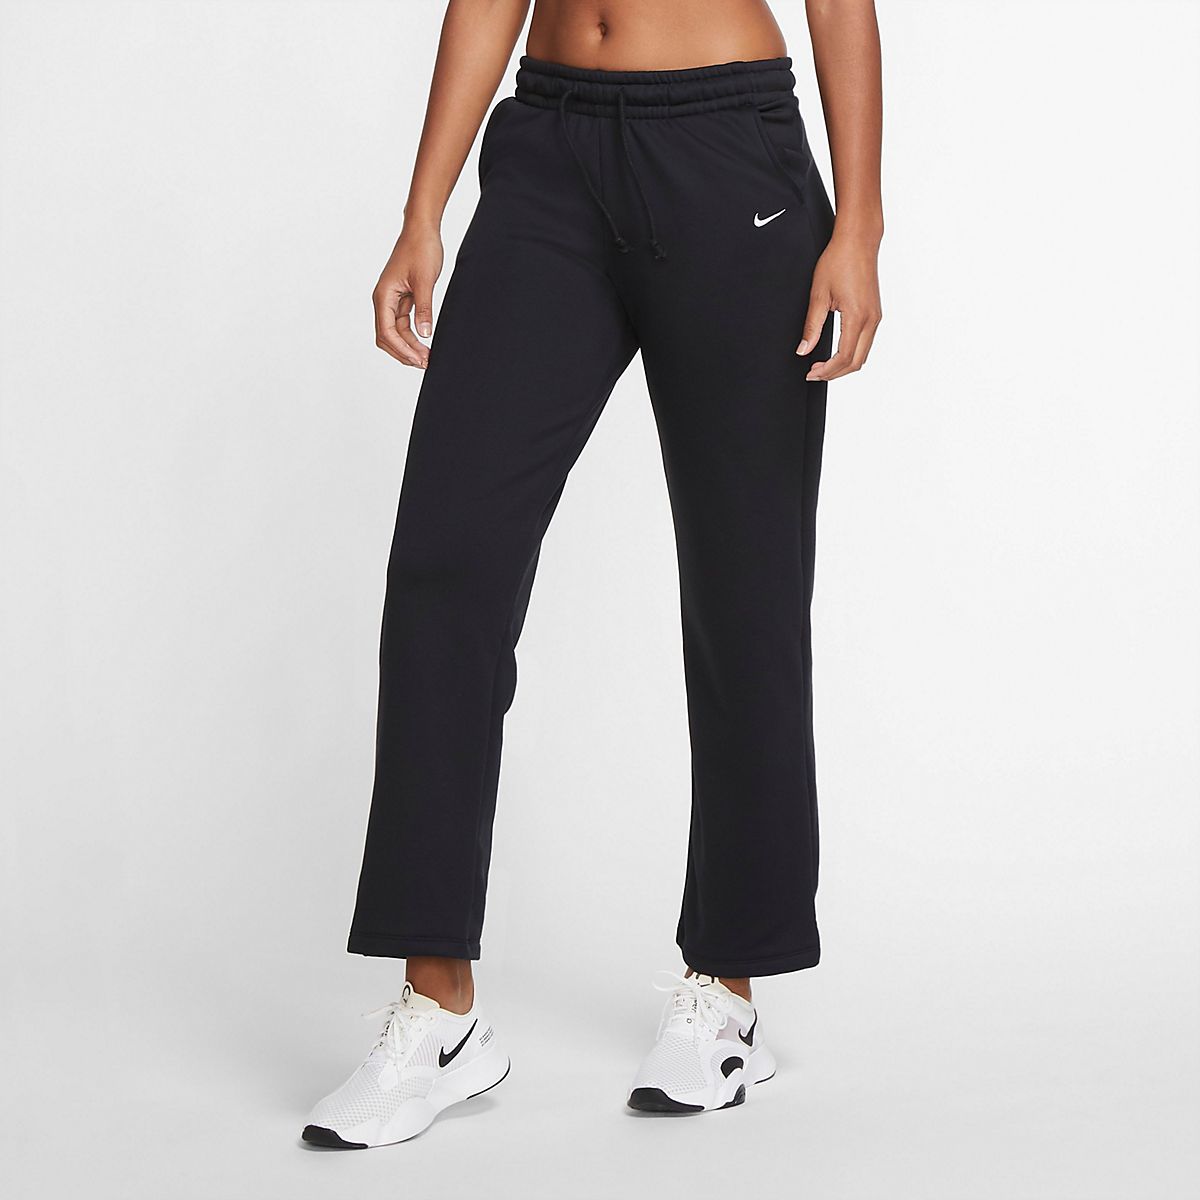 Nike Women's Therma Dri-FIT All Time Classic Training Pants